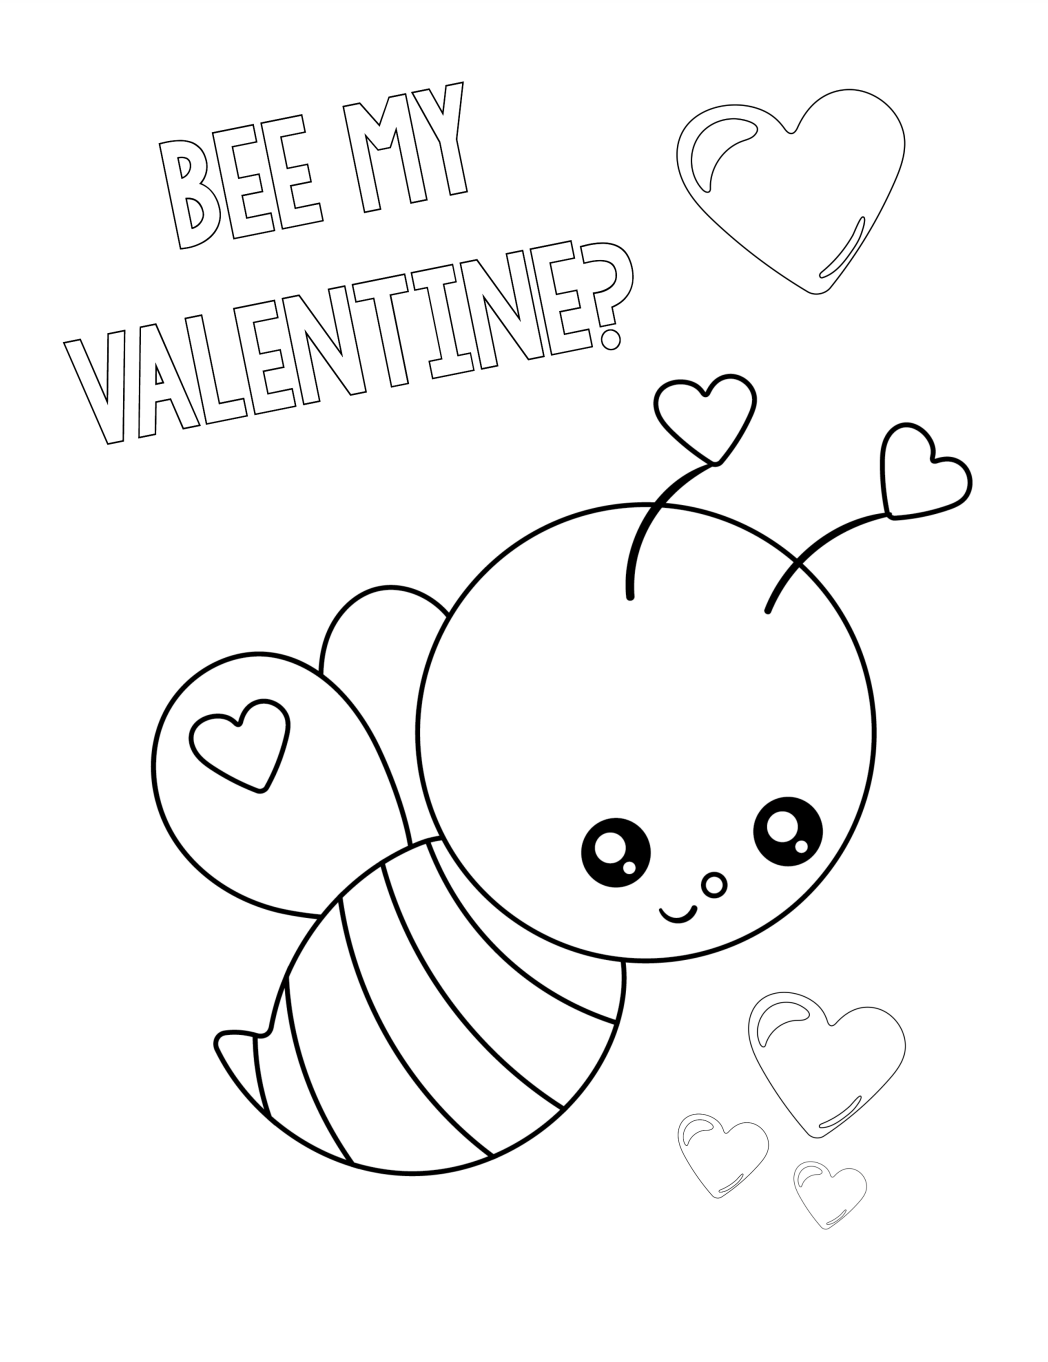 Cute Valentine #39 s Day Coloring Pages for Kids Crazy Little Projects